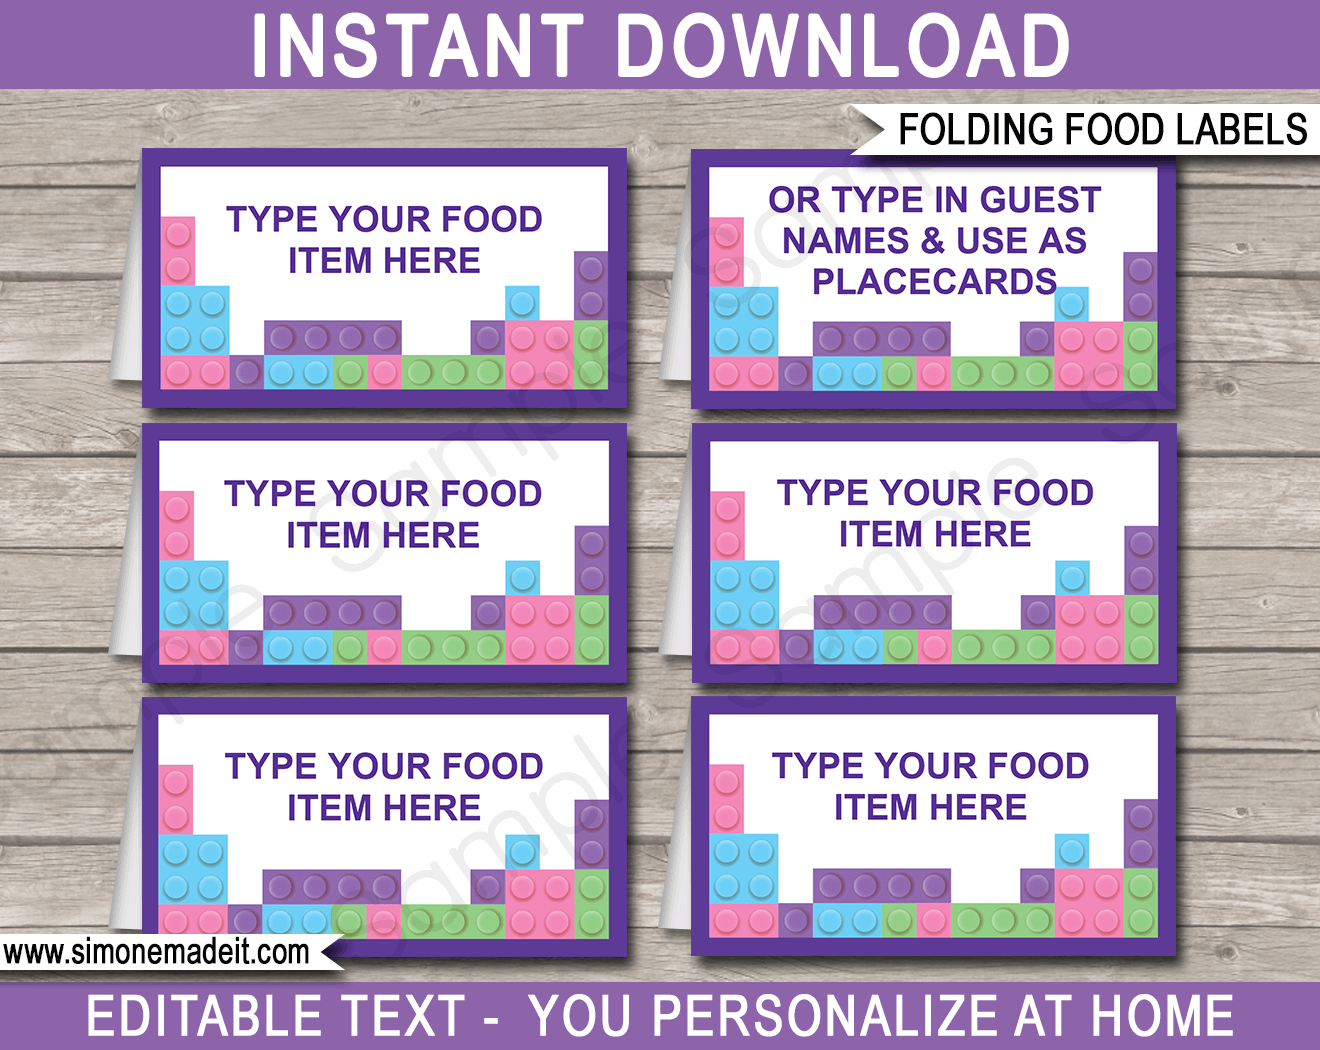 Printable Lego Friends Food Labels | Food Buffet Tags | Tent Cards | Place Cards | Lego Friends Theme Birthday Party Decorations | DIY Editable Template | Instant Download via simonemadeit.com